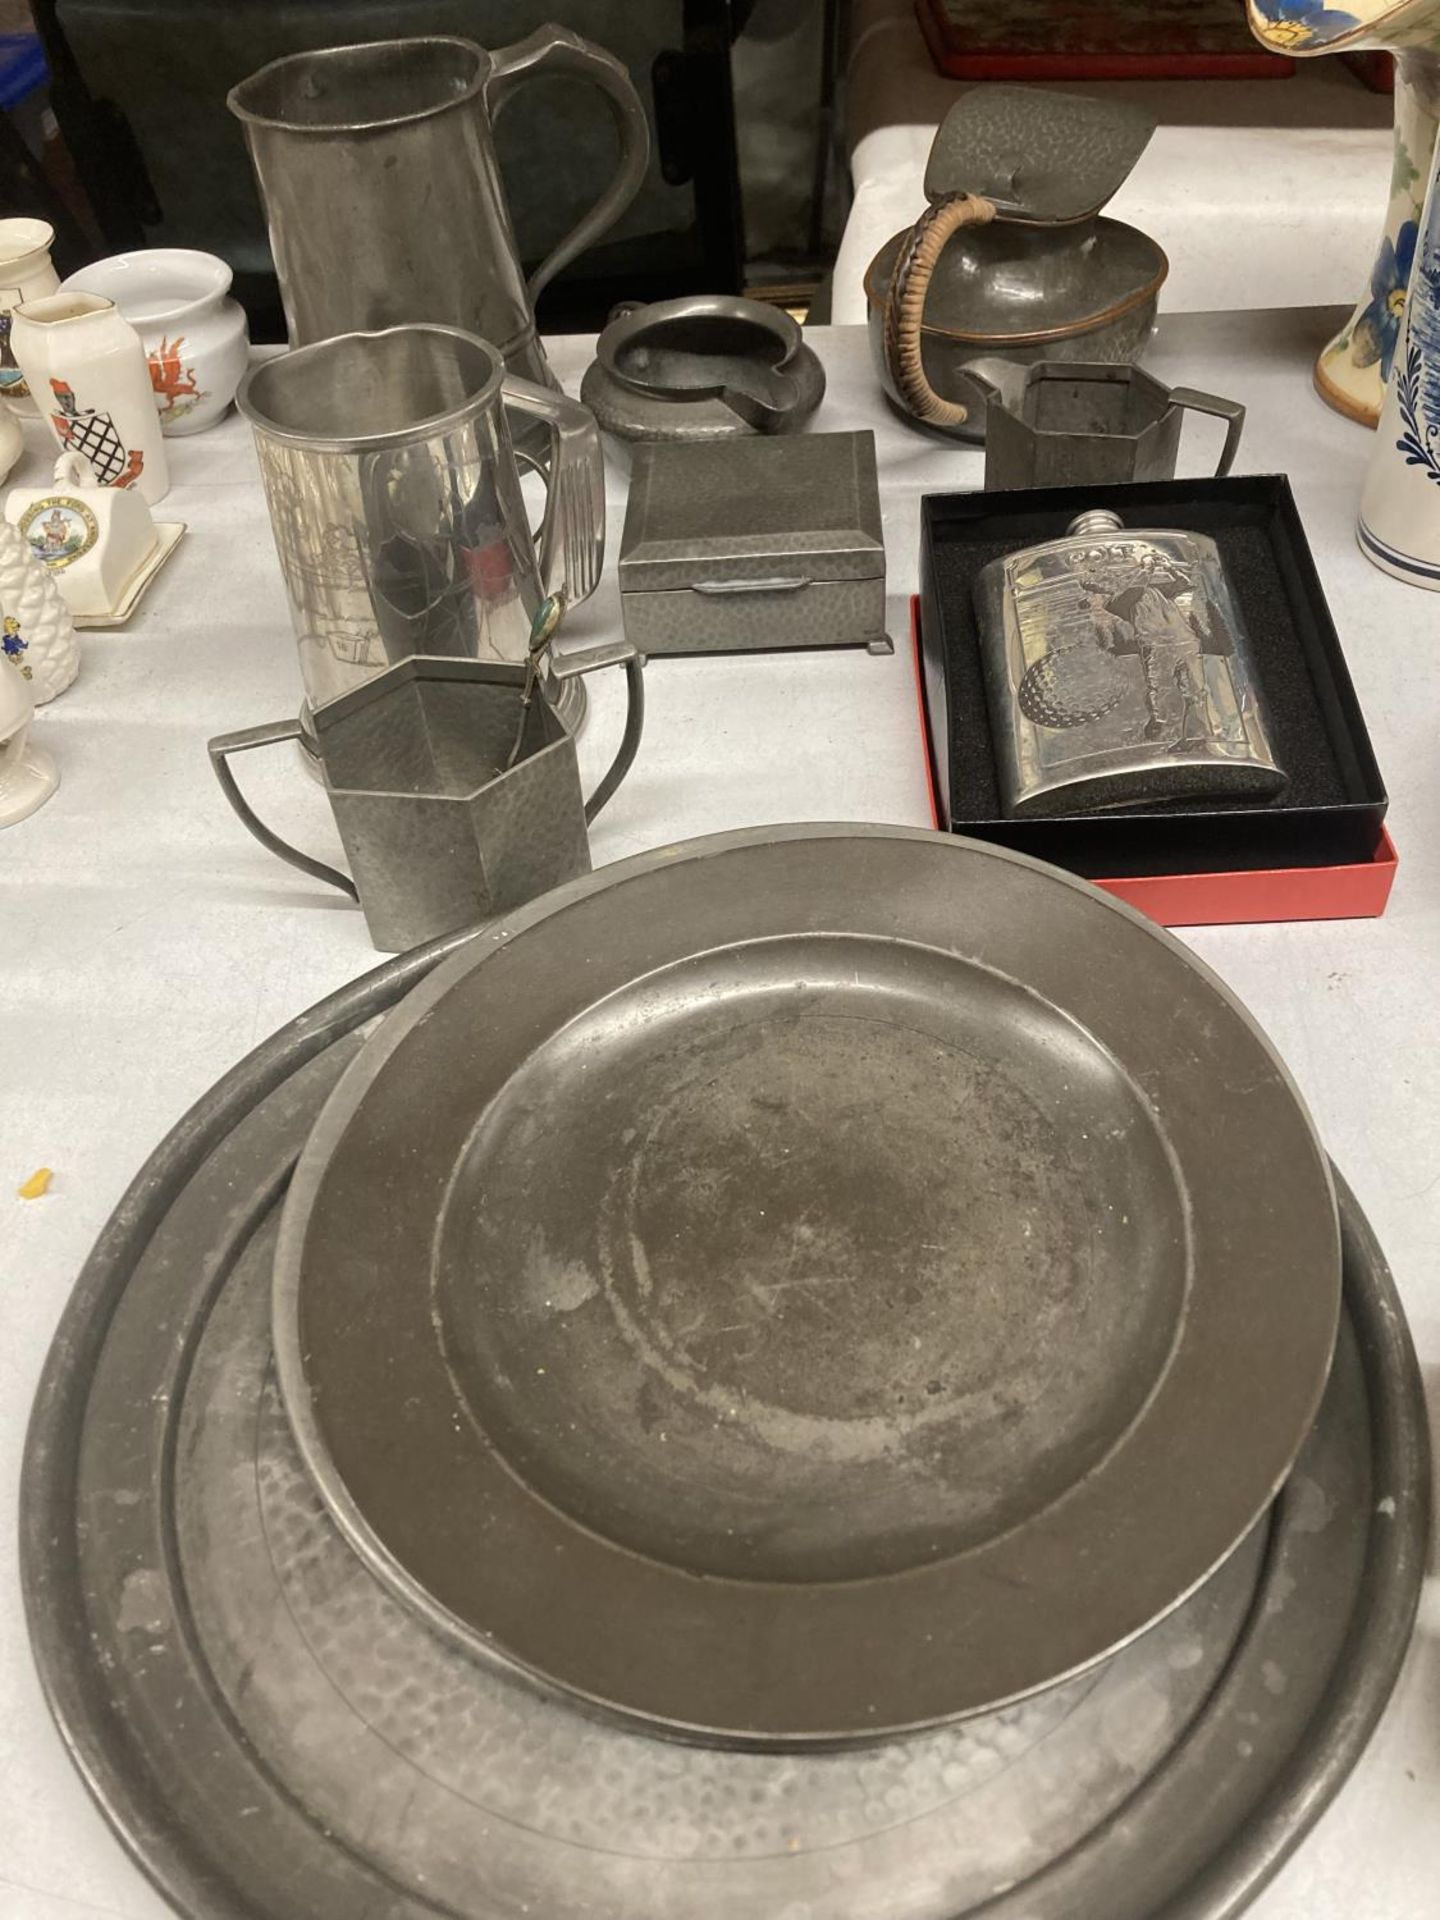 A LARGE QUANTITY OF PEWTER ITEMS TO INCLUDE PLATES, HIP FLASK, TANKARDS, BOXES, JUGS ETC